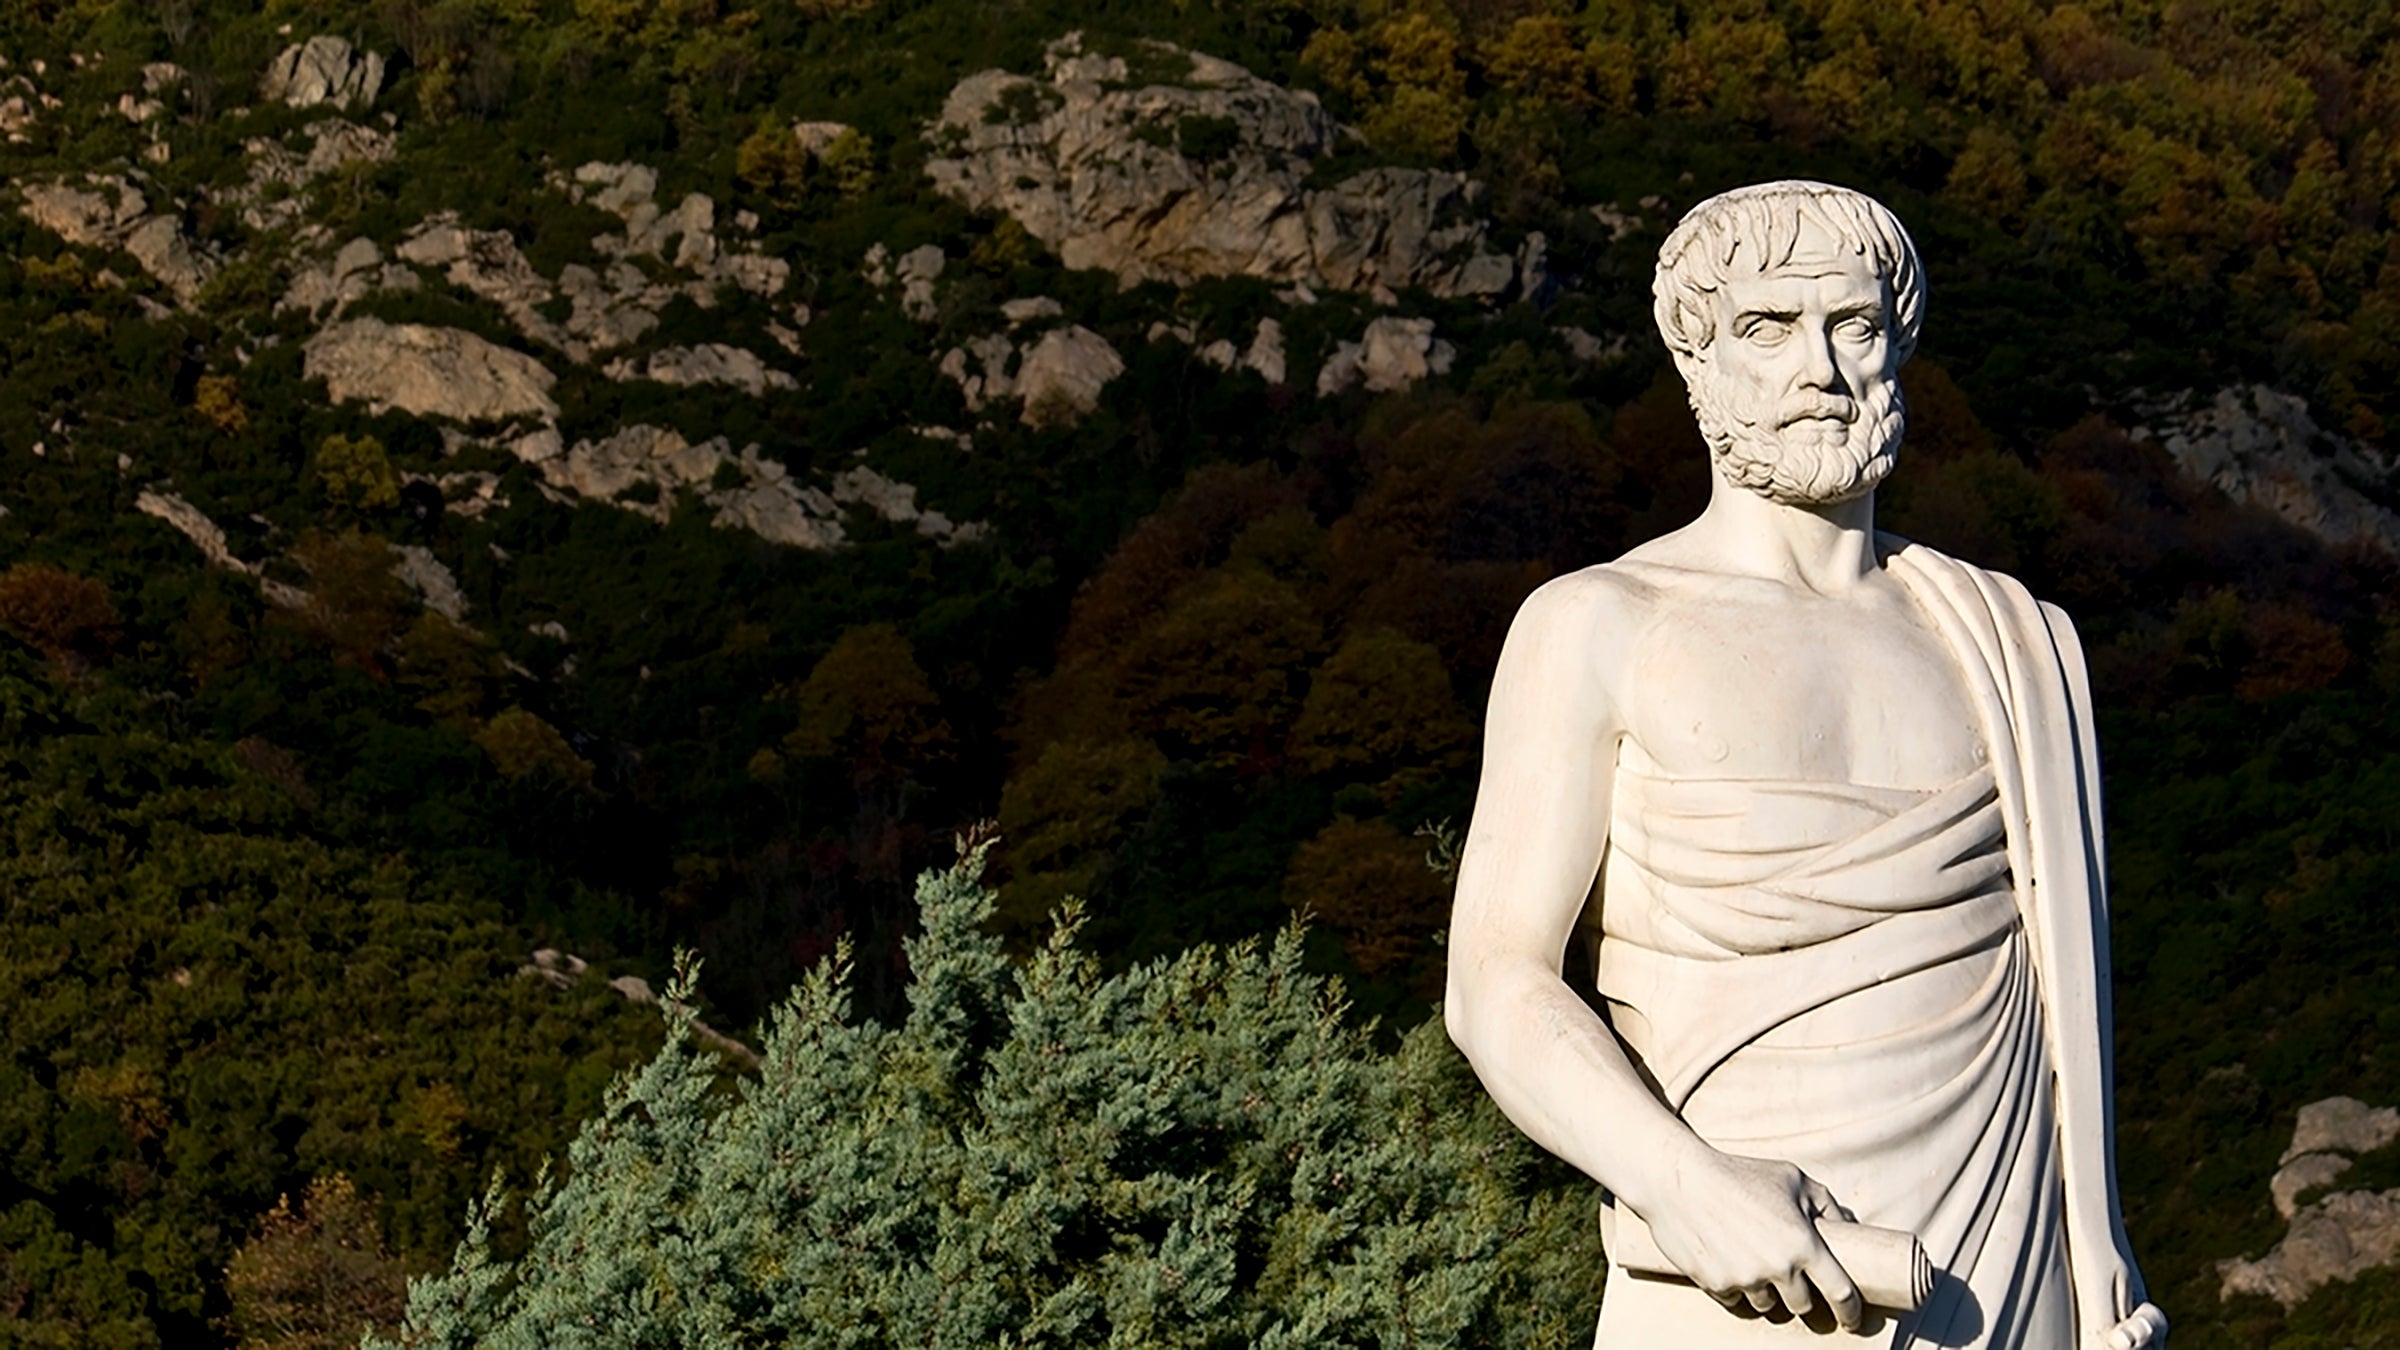 USC’s Caleb Finch found that ancient Greeks made few mentions of anything akin to mild cognitive impairment. (Photo/Panos Karapanagiotis, iStock) Me